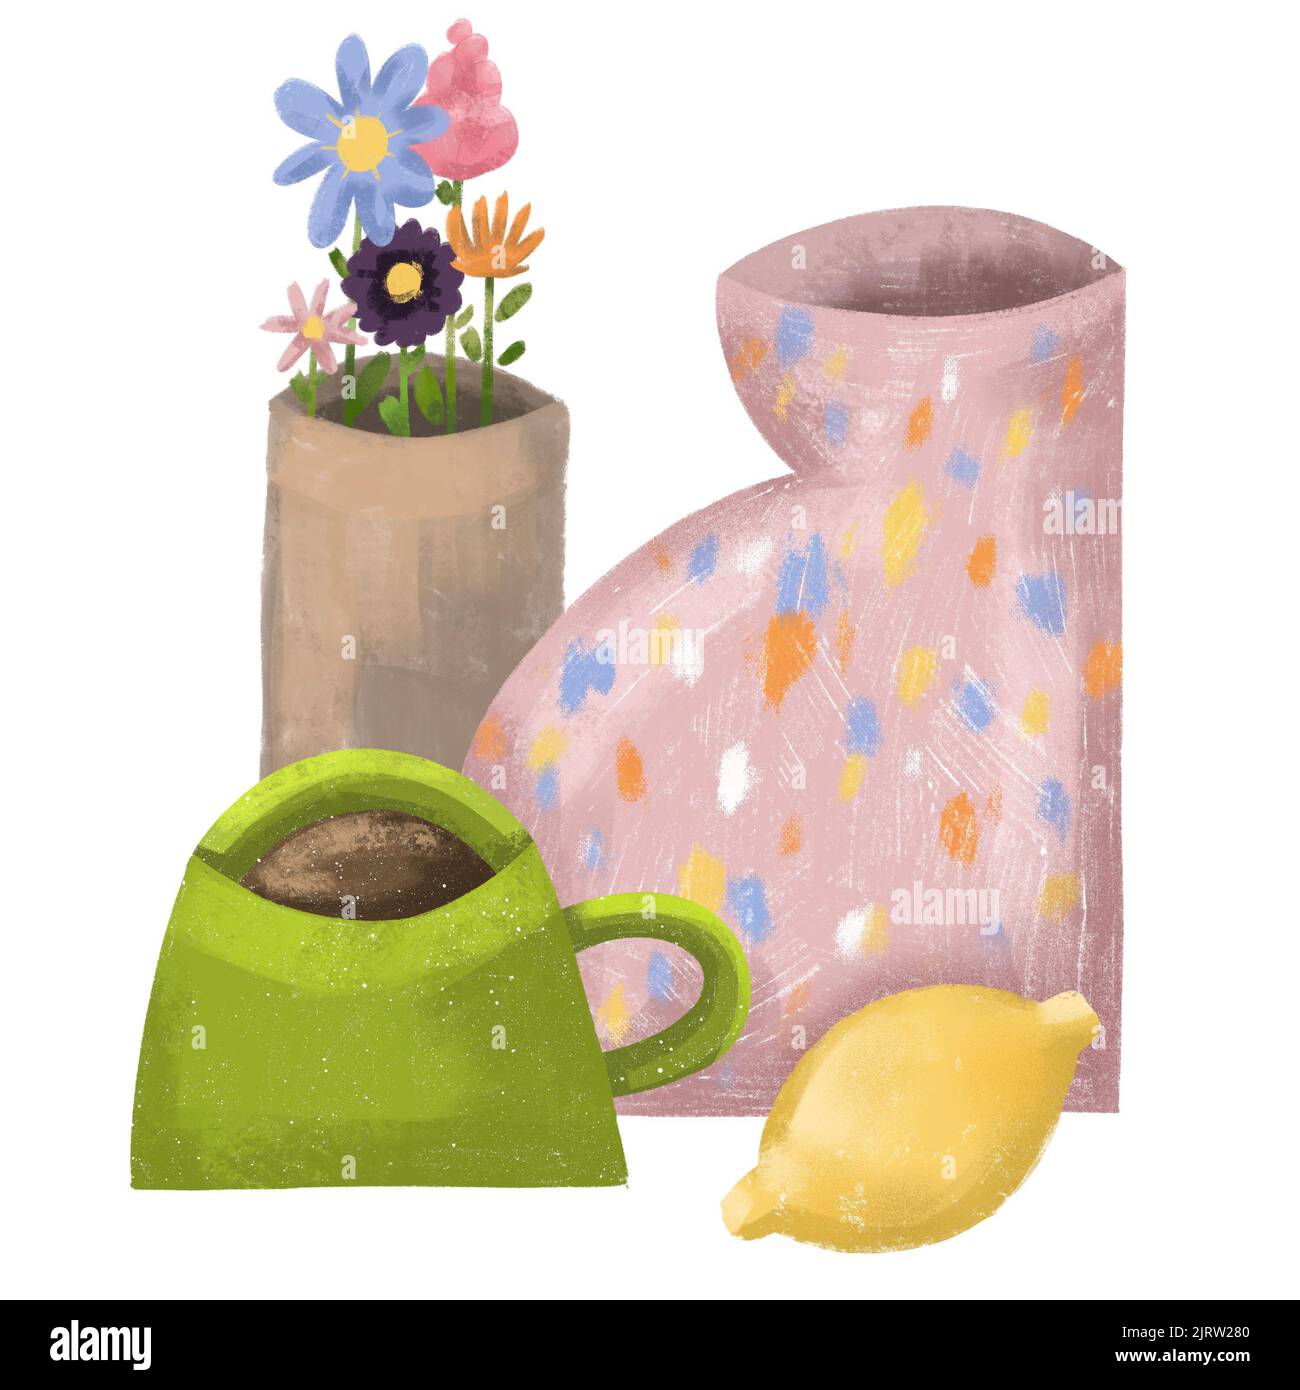 a cup of tea, lemon and flower vase breakfast set illustration. good morning concept, blogger content . Stock Photo